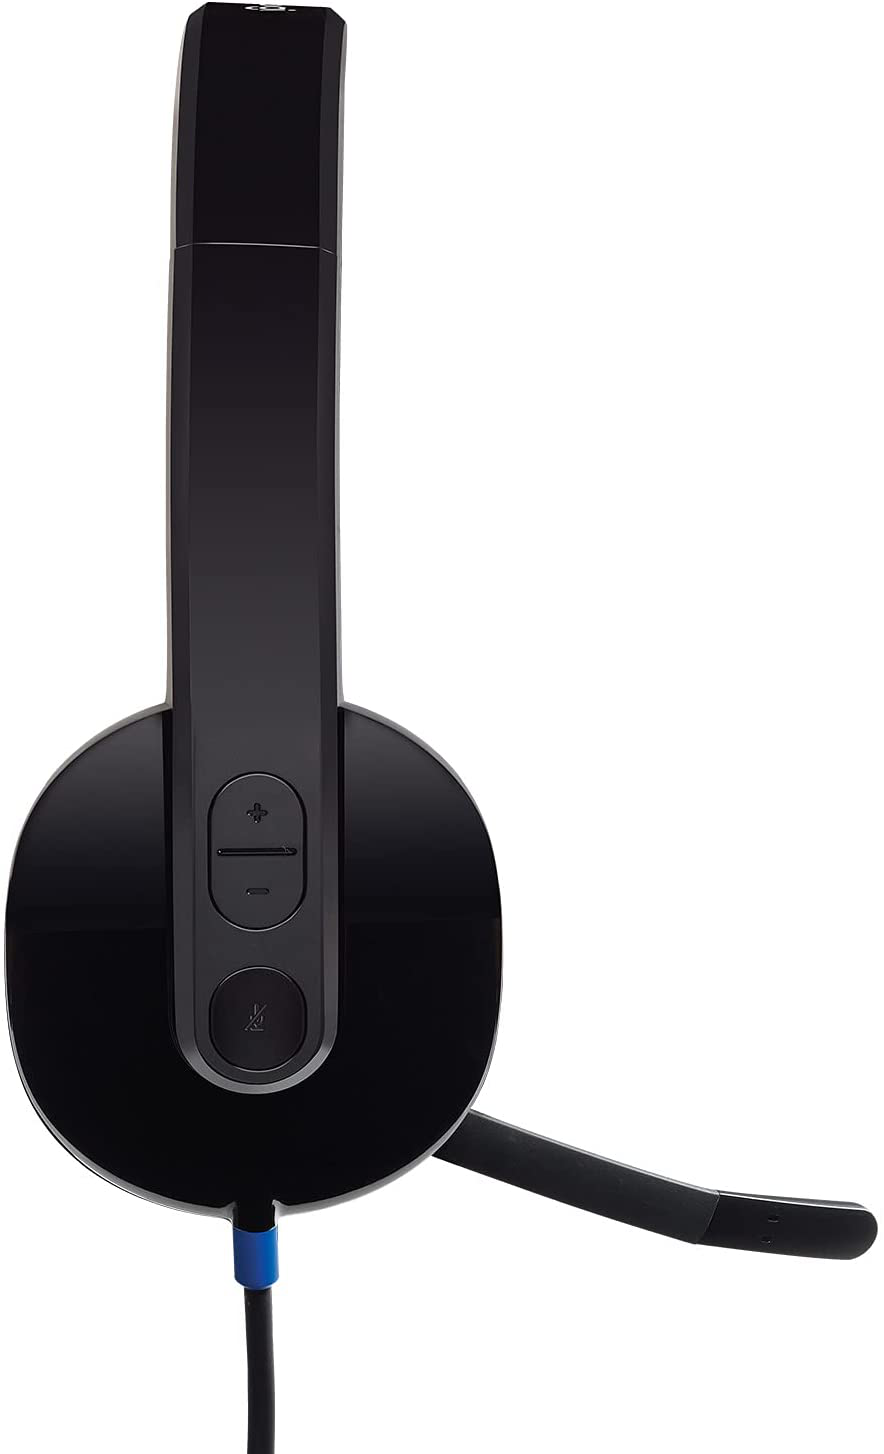 Logitech High-Performance USB Headset H540 for Windows and Mac, Skype Certified